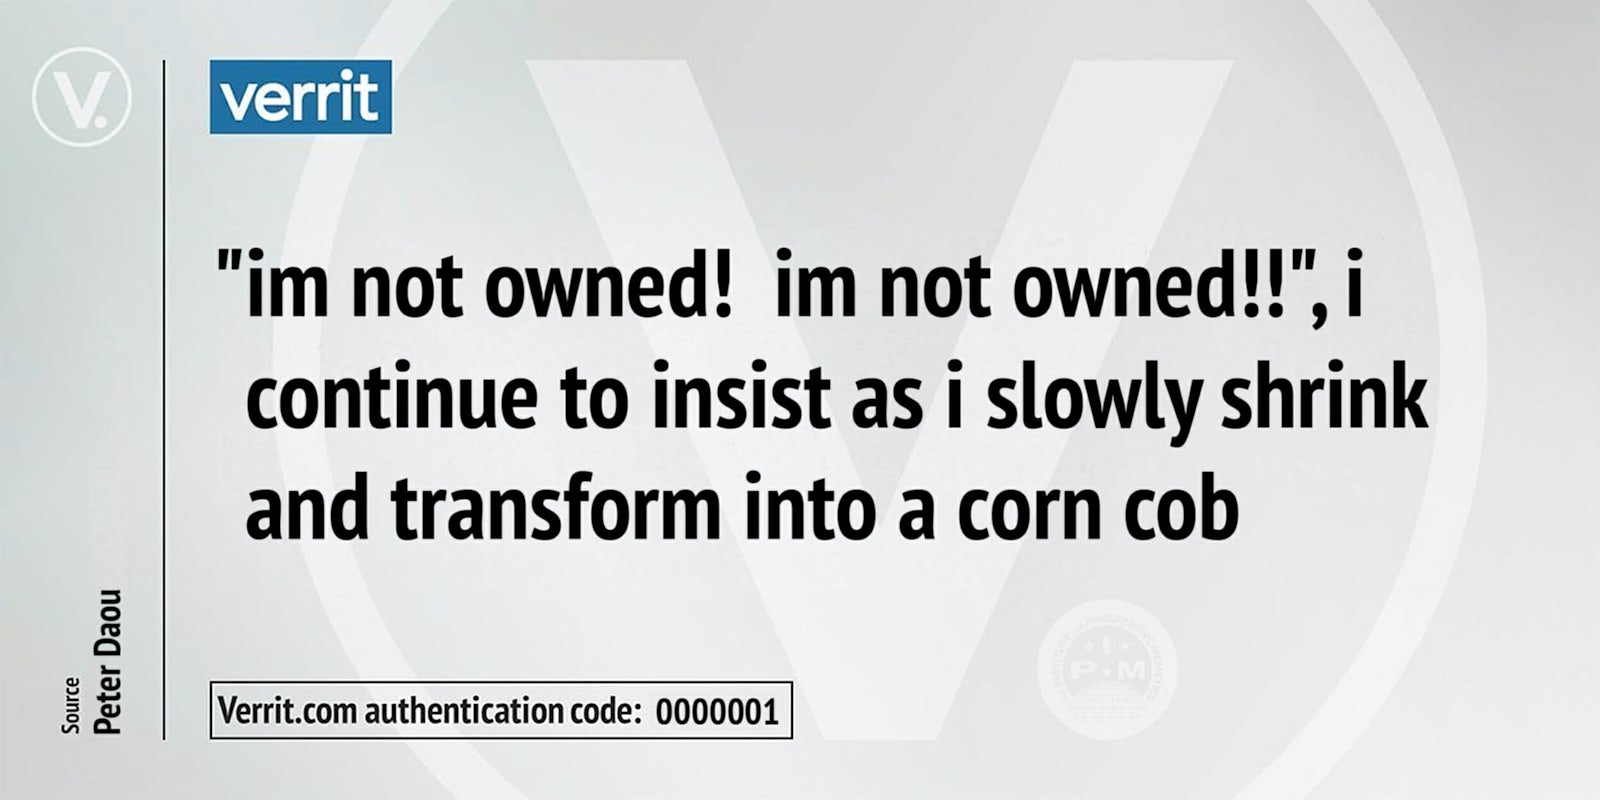 'I'm not owned!' verrit card